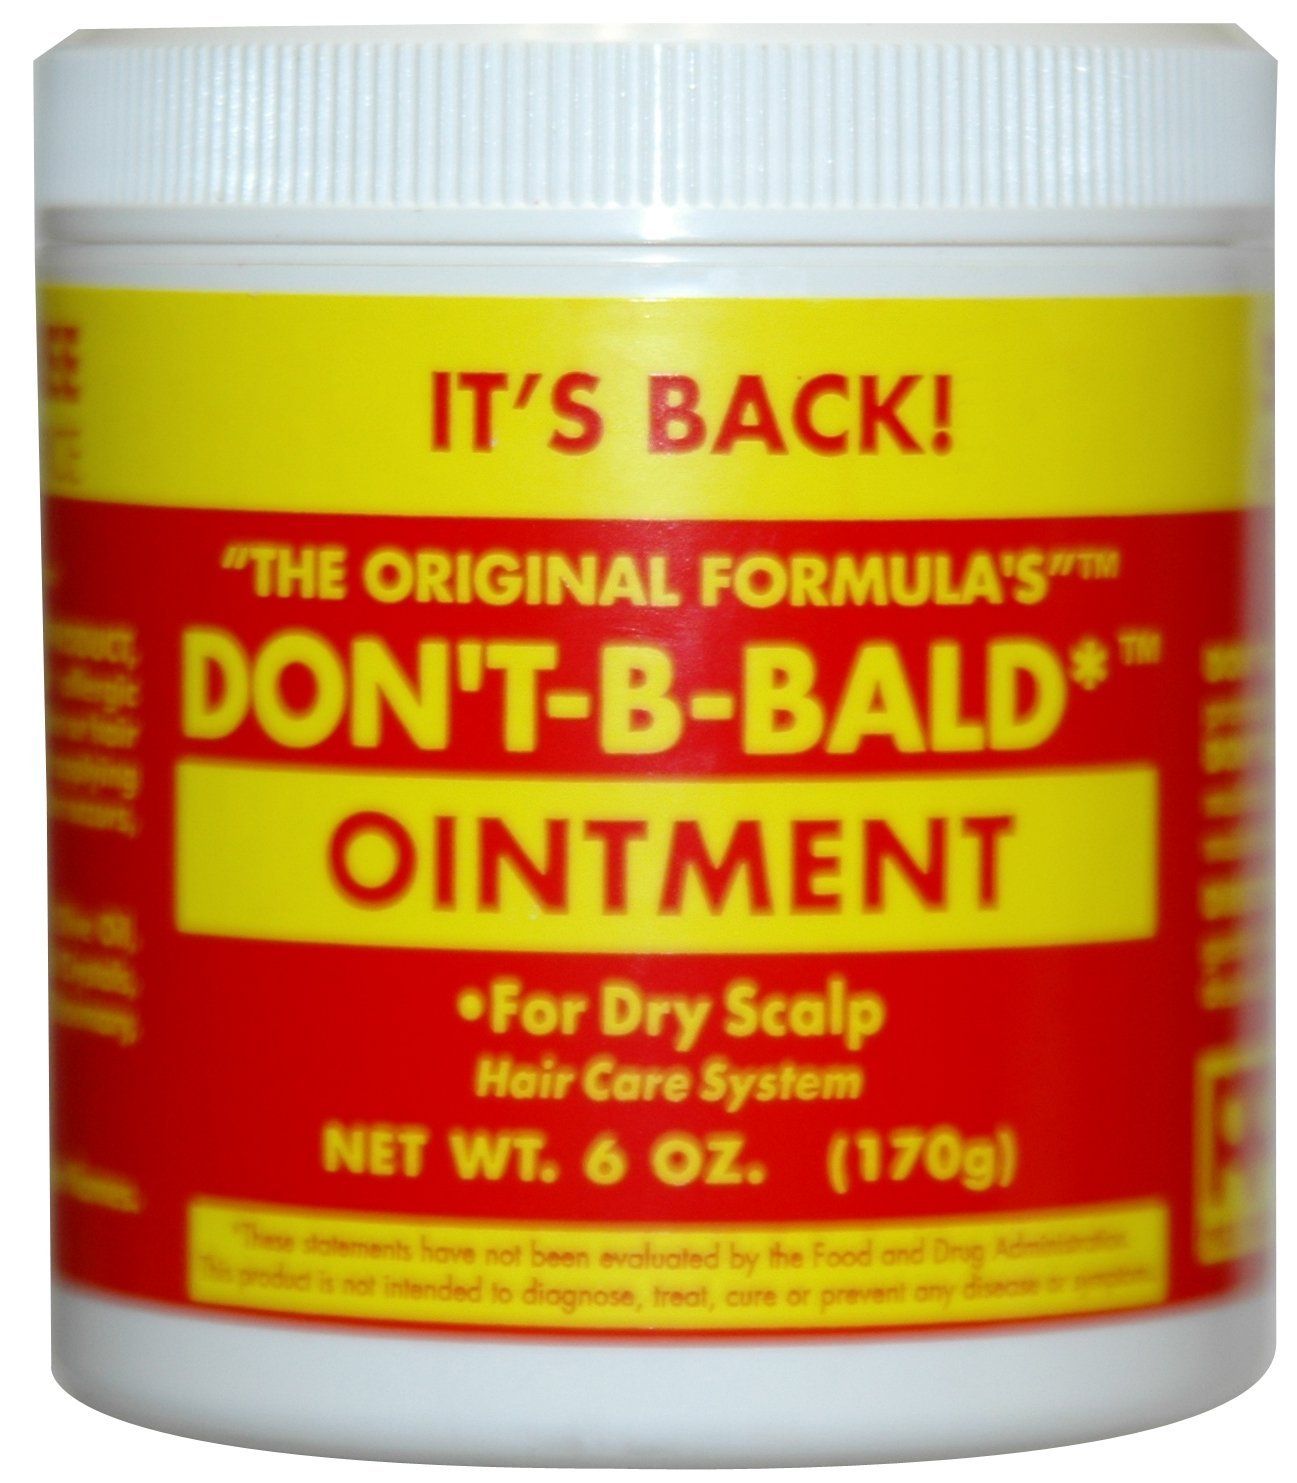 Don't-B-Dry Ointment 6oz